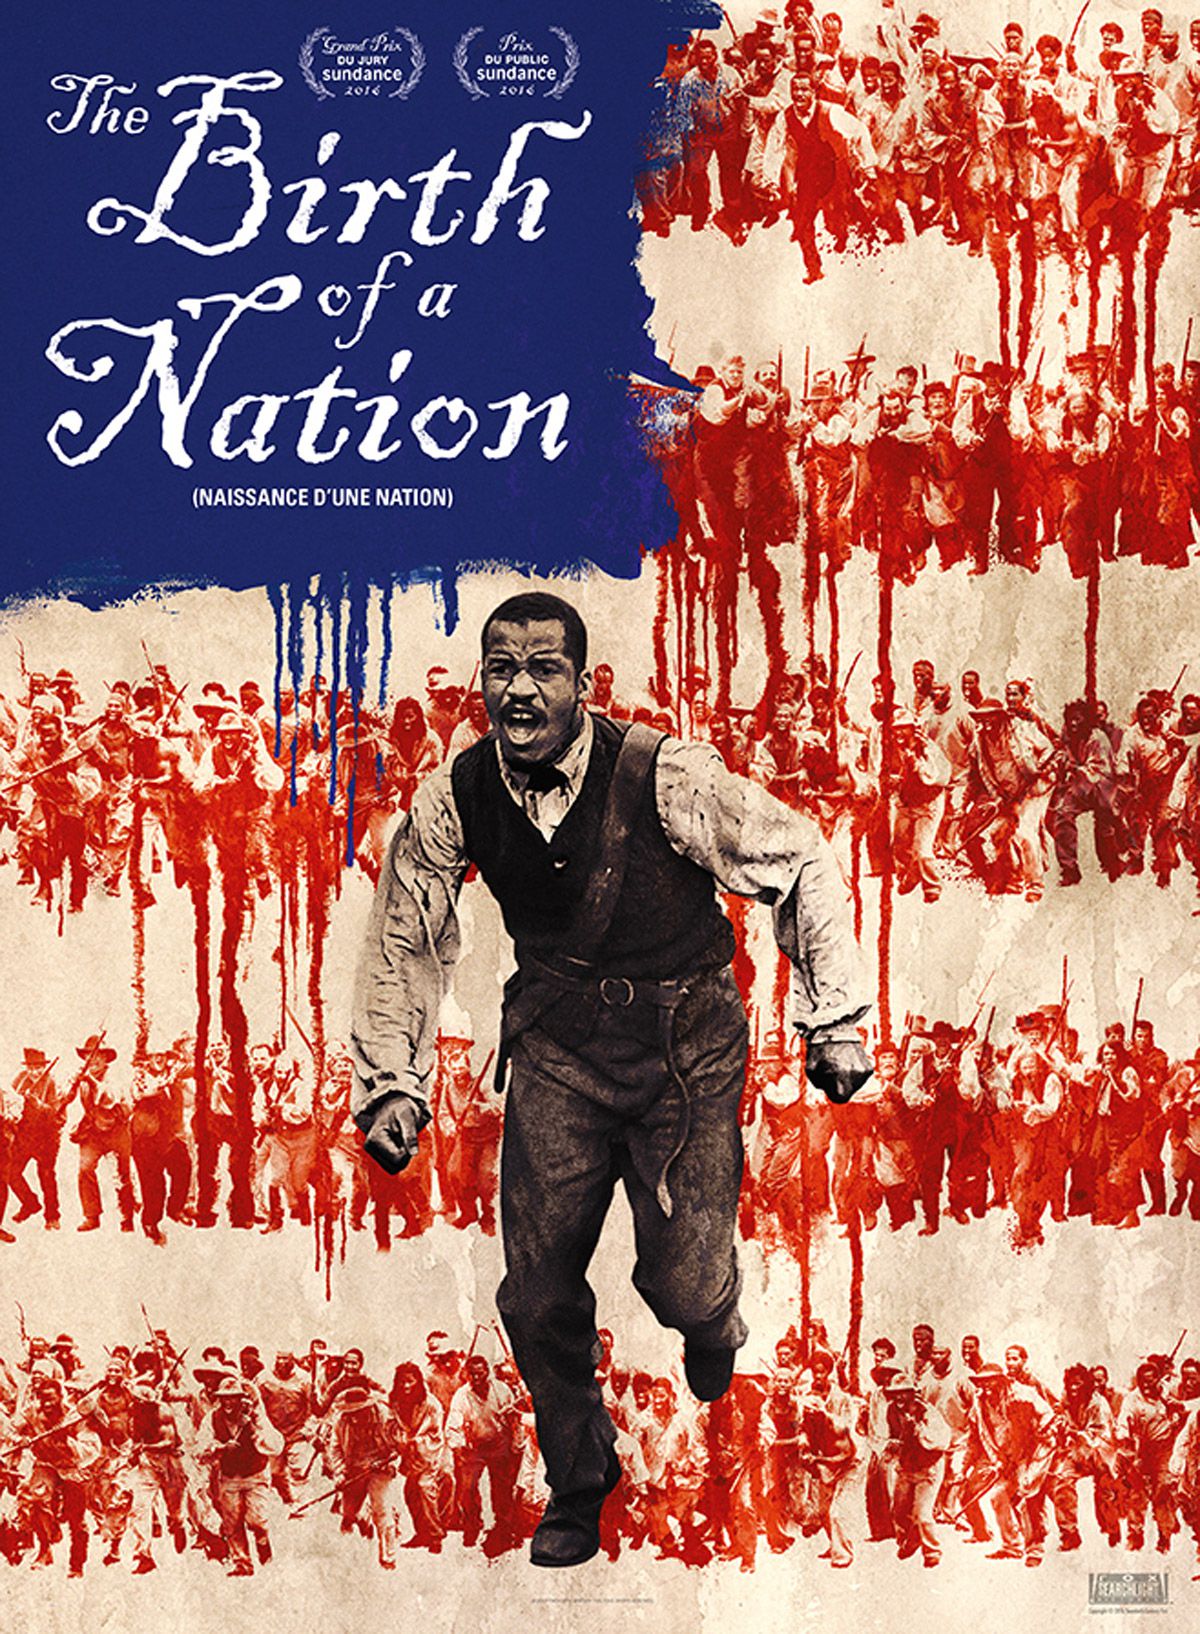 The Birth of a Nation - Film (2016) streaming VF gratuit complet